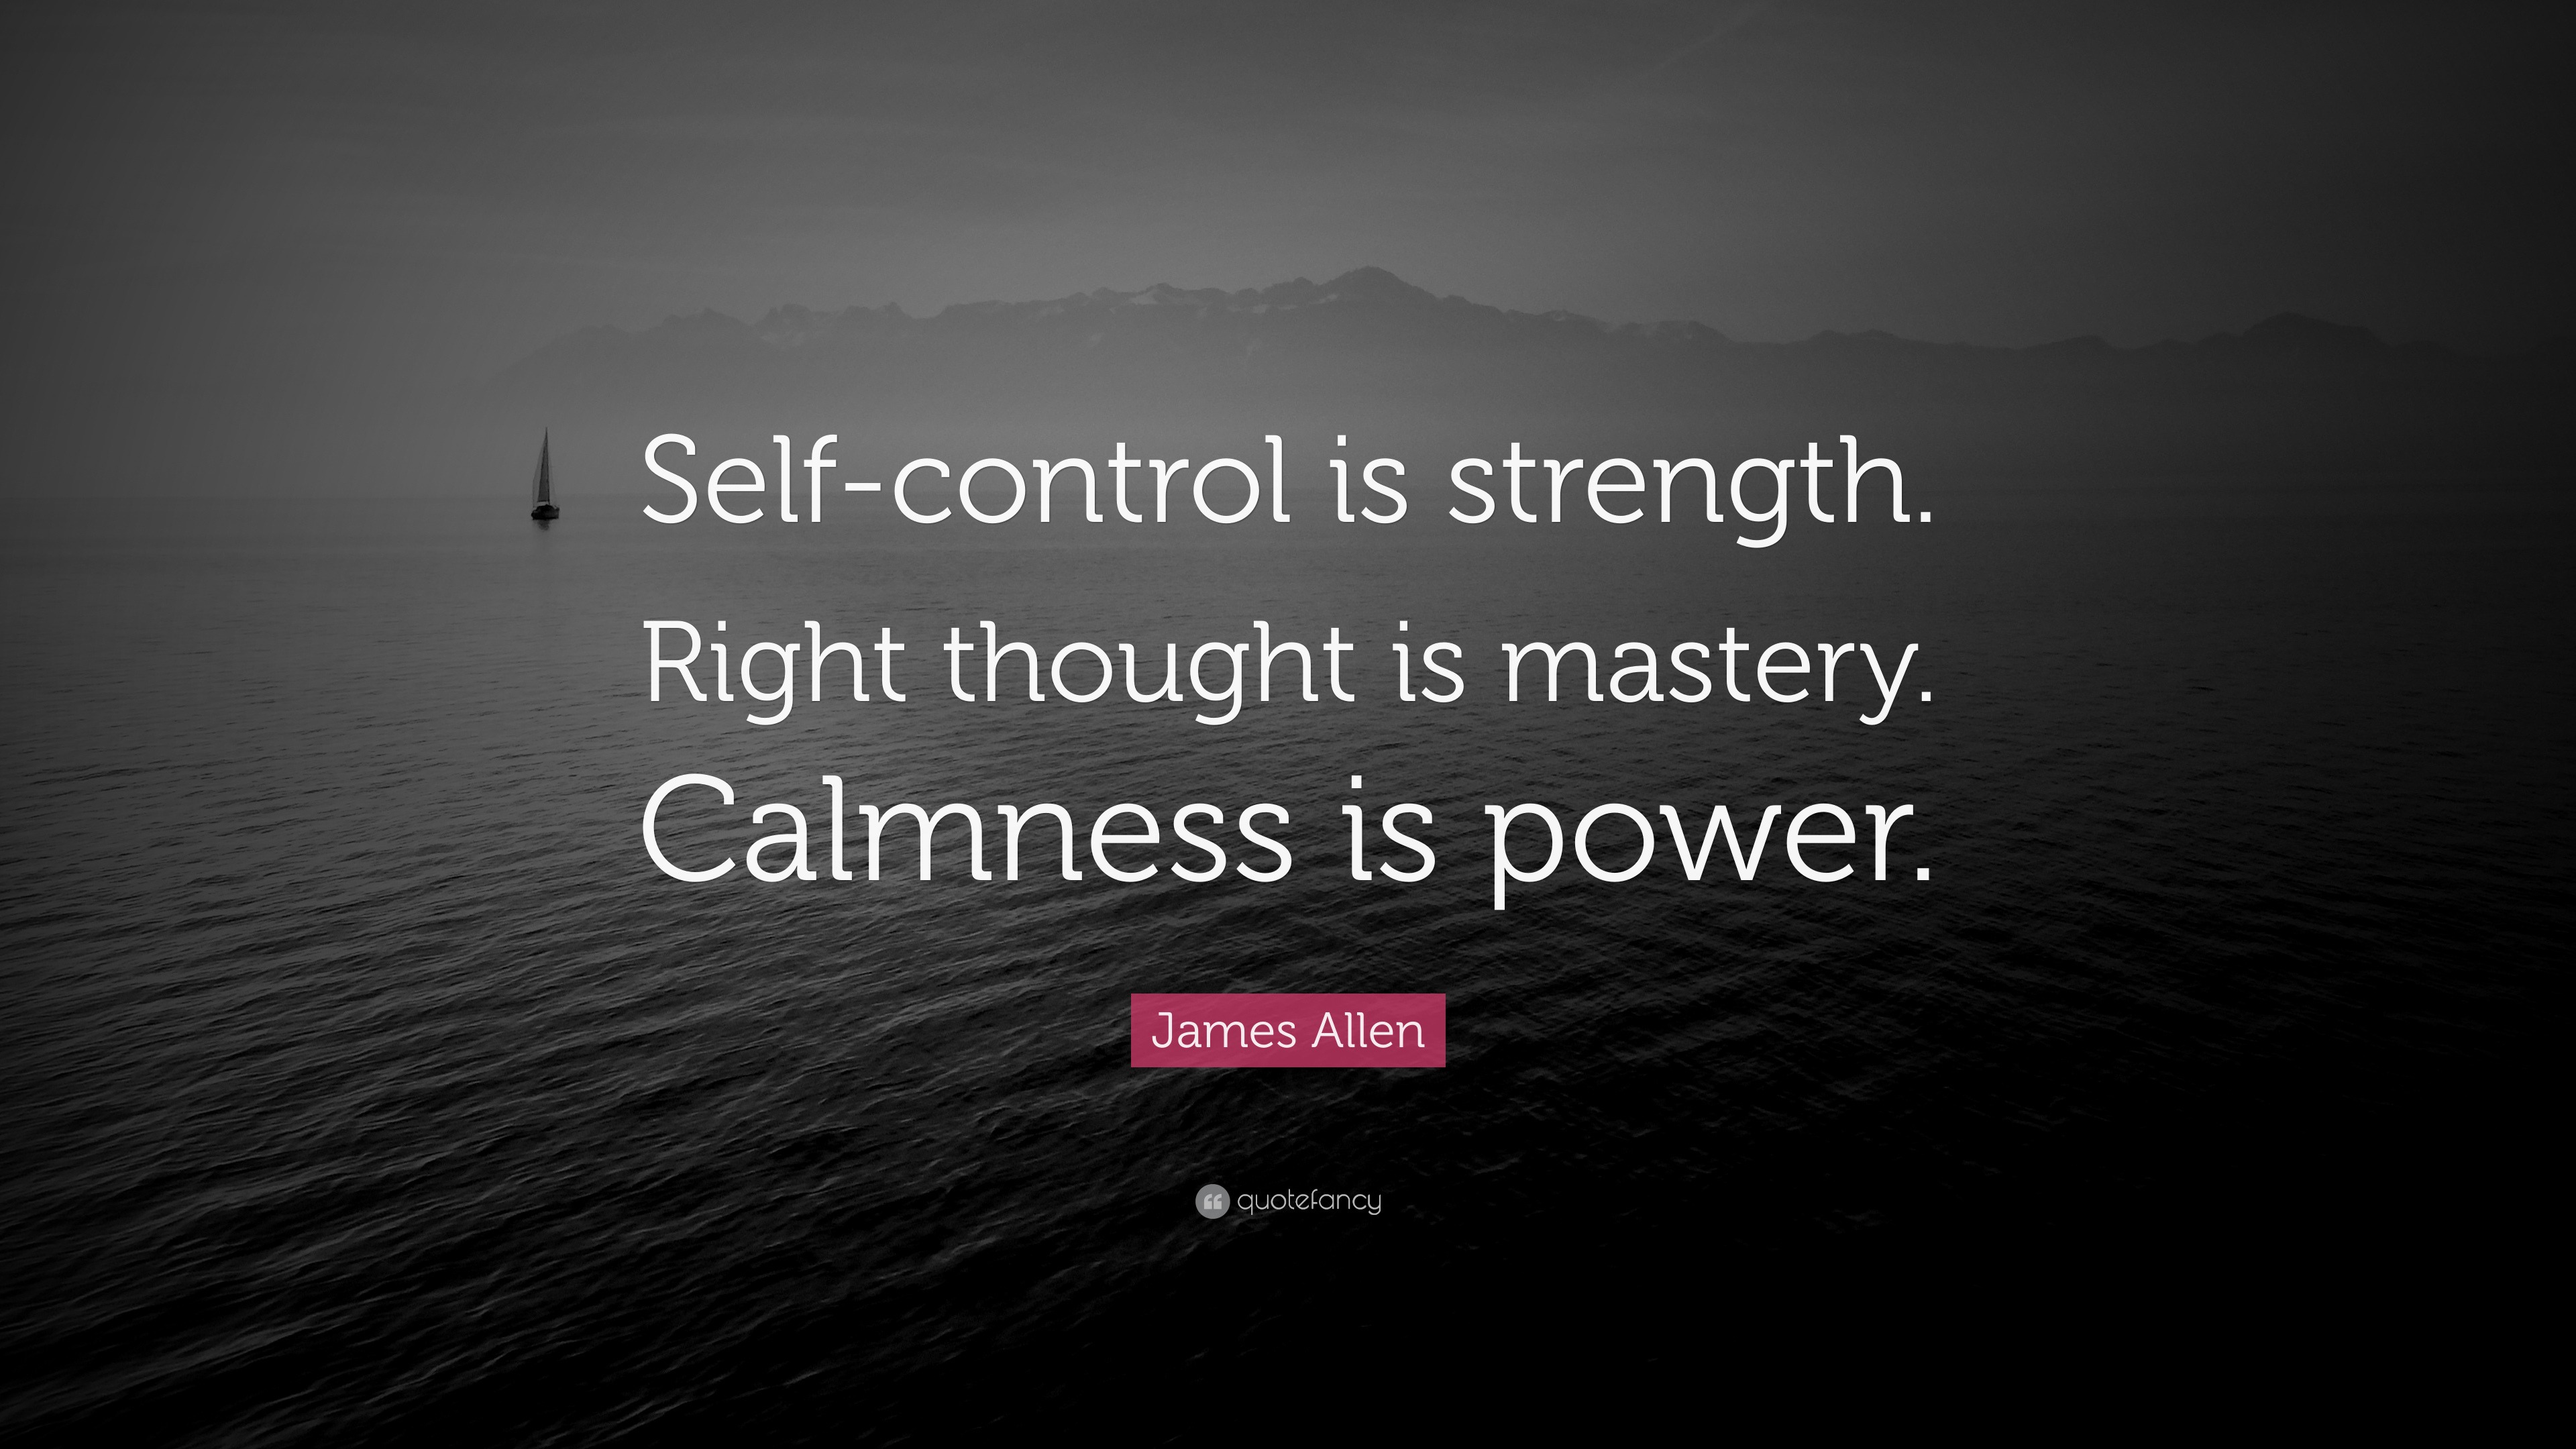 James Allen Quote: “Self-control is strength. Right thought is mastery